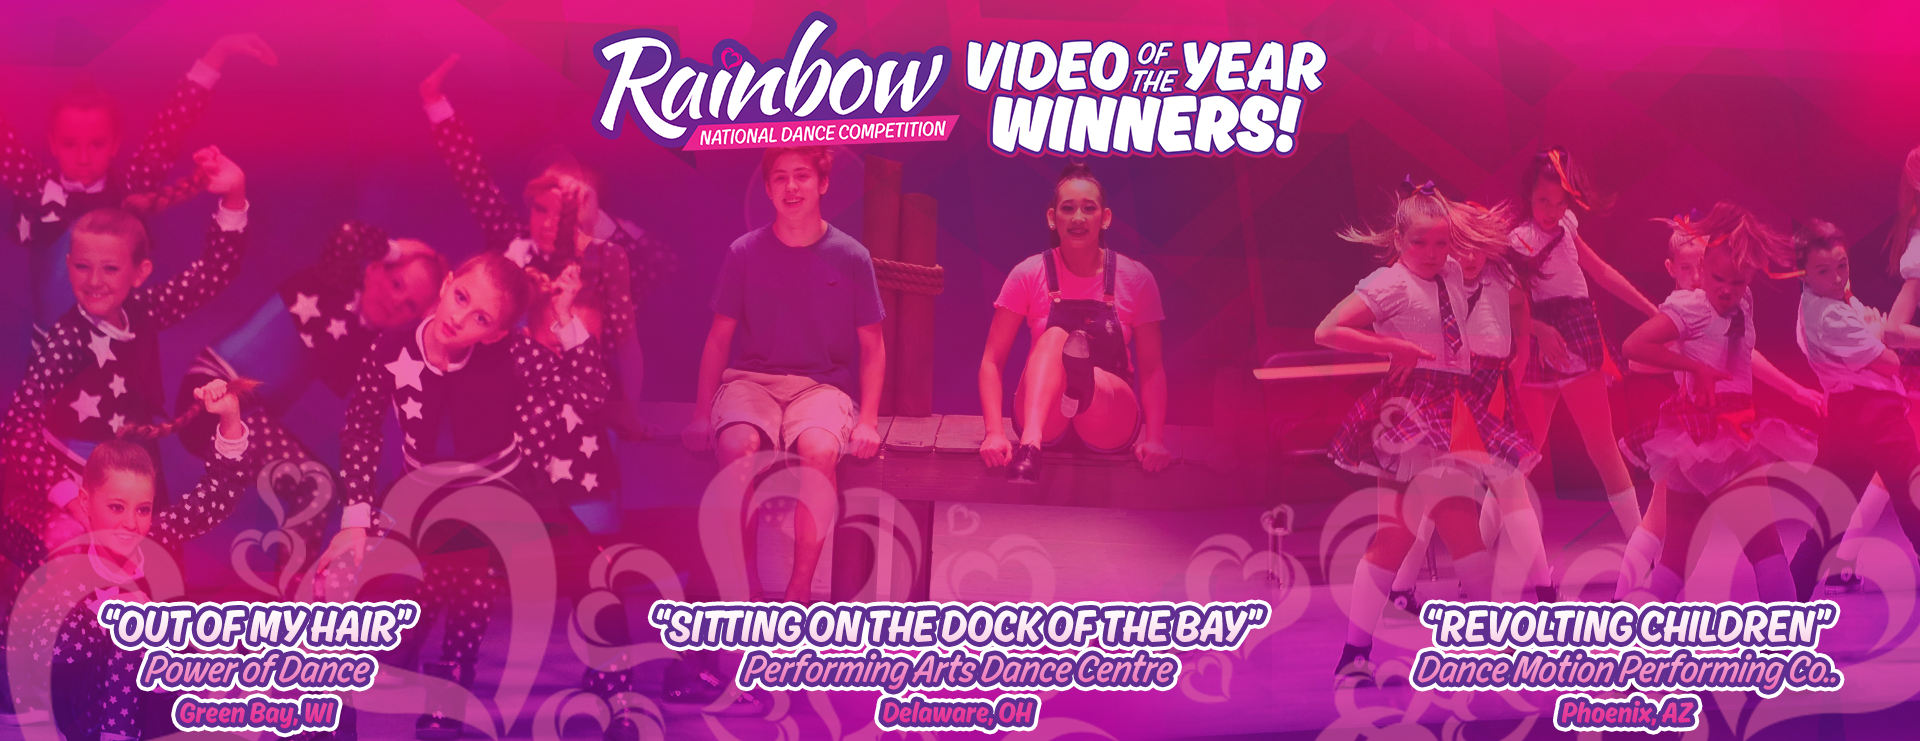 Introducing Rainbow’s 2018 VOY Video Montages! WATCH NOW!